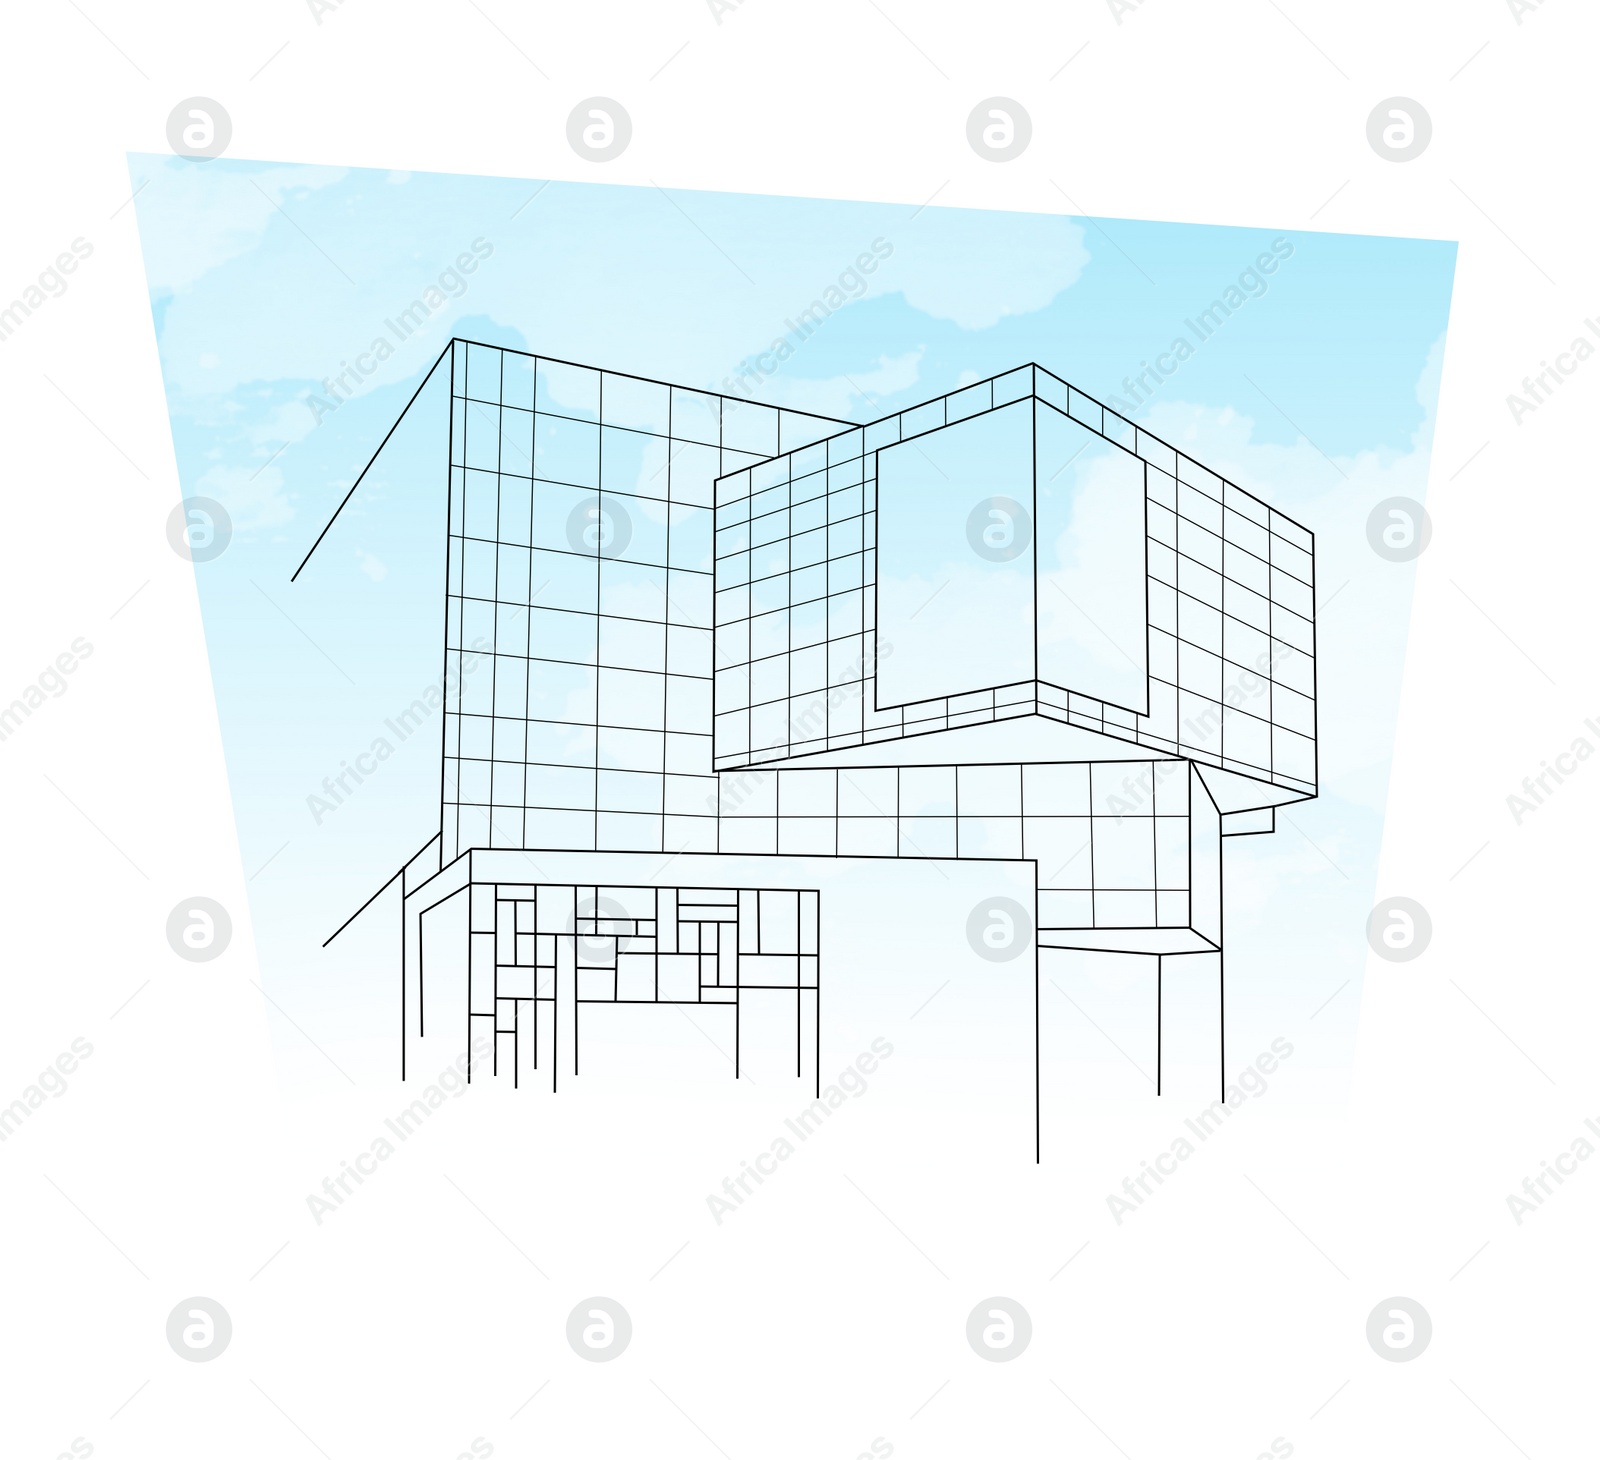 Image of Illustration of modern building on white background. Urban architecture